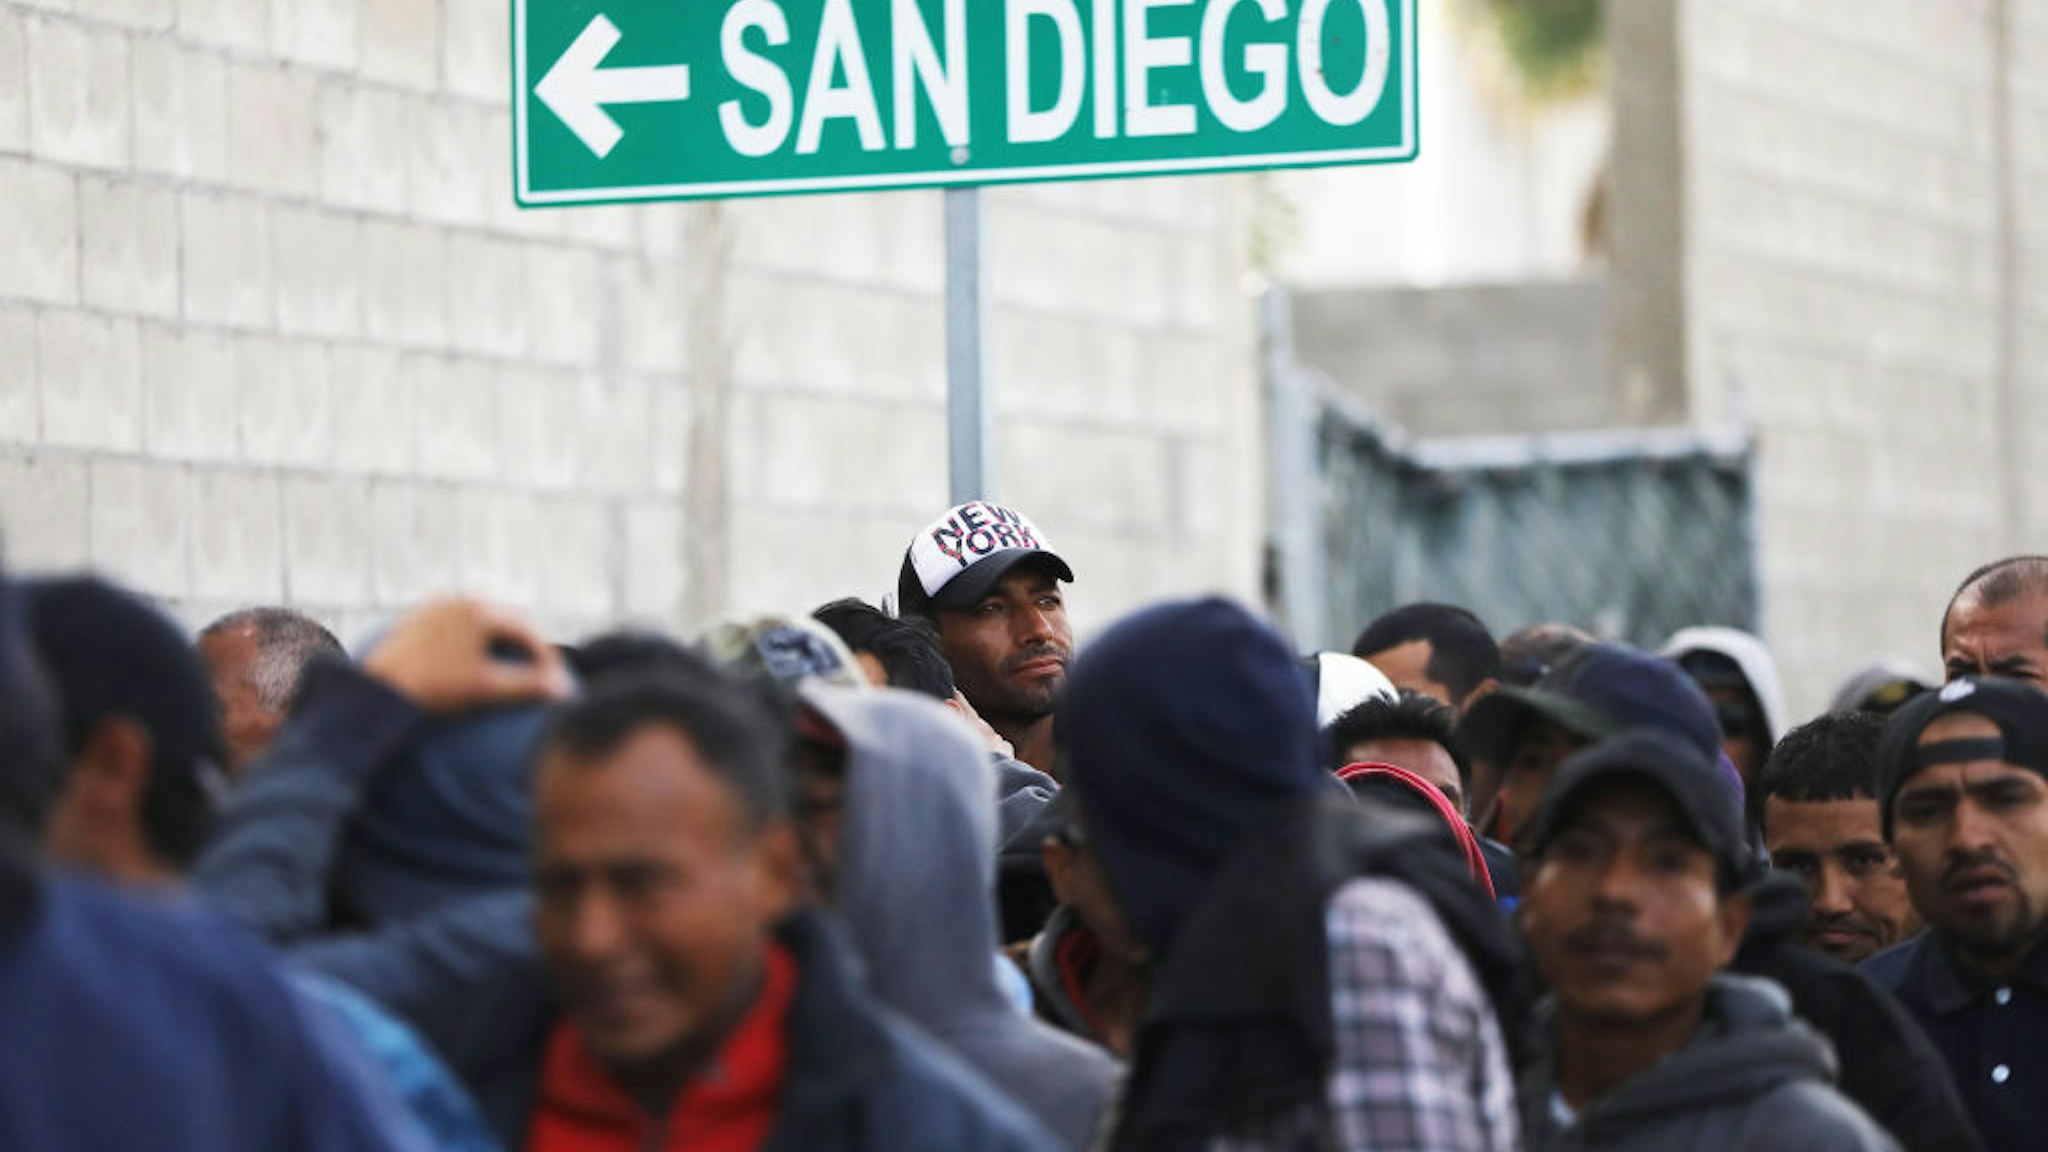 TIJUANA, MEXICO - MARCH 09: Migrants line up for free breakfast at the Desayunador Salesiano Padre Chava shelter and soup kitchen in front of sign for San Diego on March 9, 2018 in Tijuana, Mexico. The soup kitchen receives between 1,000-1,200 migrants daily, most of whom have been deported from the United States. Deportees sometimes end up homeless on the streets of Tijuana. (Photo by Mario Tama/Getty Images)